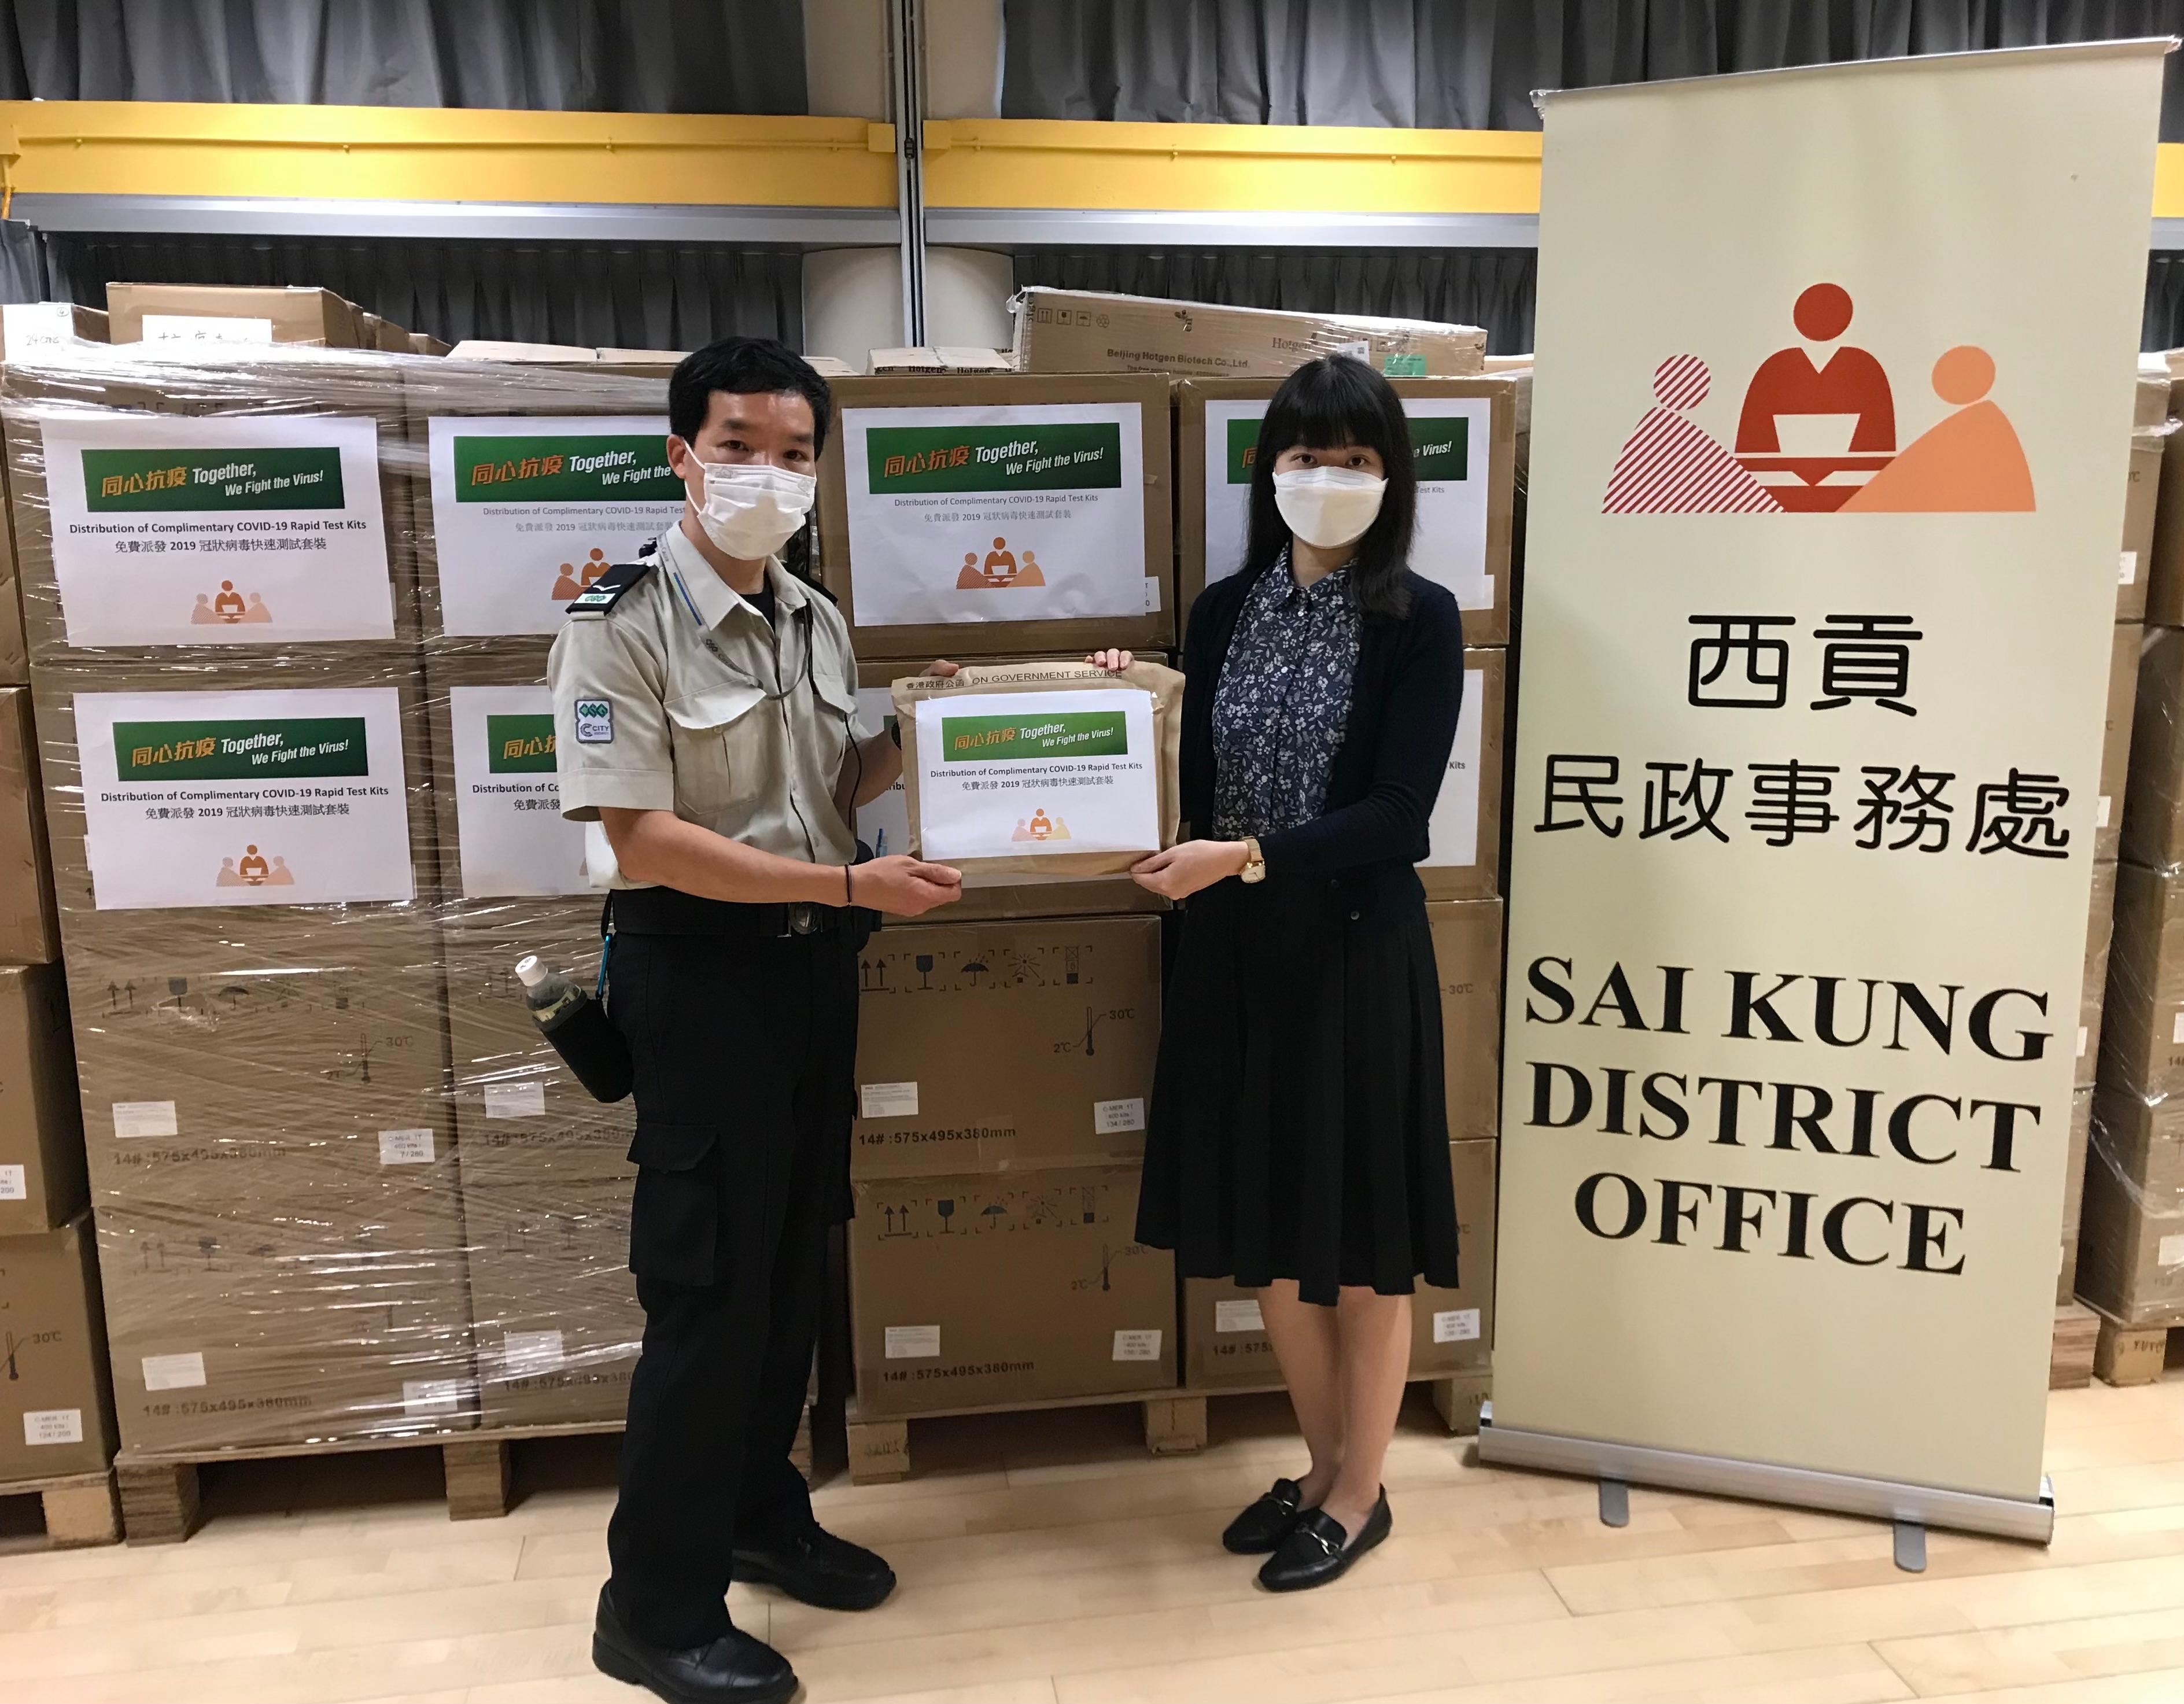 The Sai Kung District Office distributed COVID-19 rapid test kits to households, cleansing workers and property management staff living and working in The Papillons for voluntary testing through the property management company.